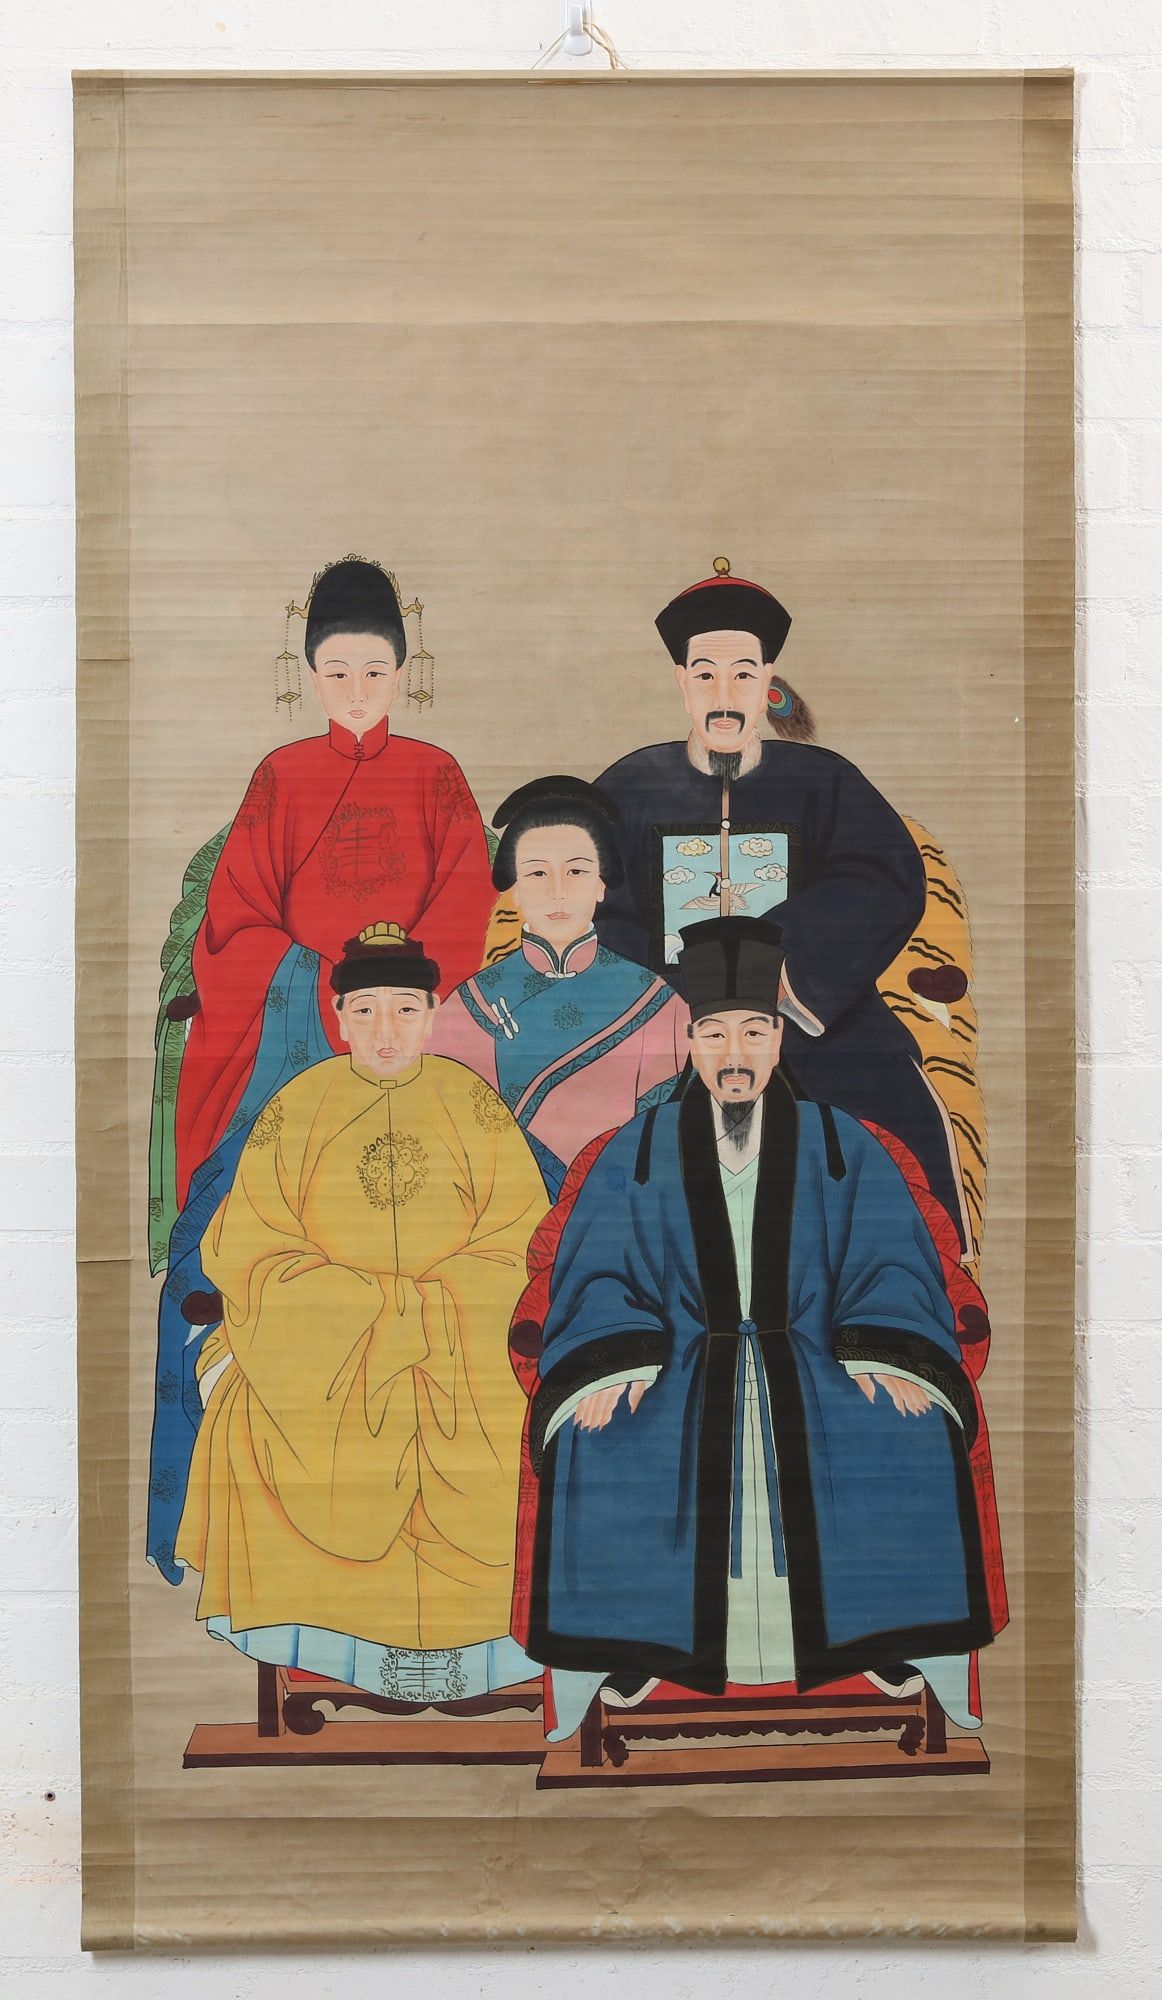 A CHINESE GROUP ANCESTOR PORTRAIT